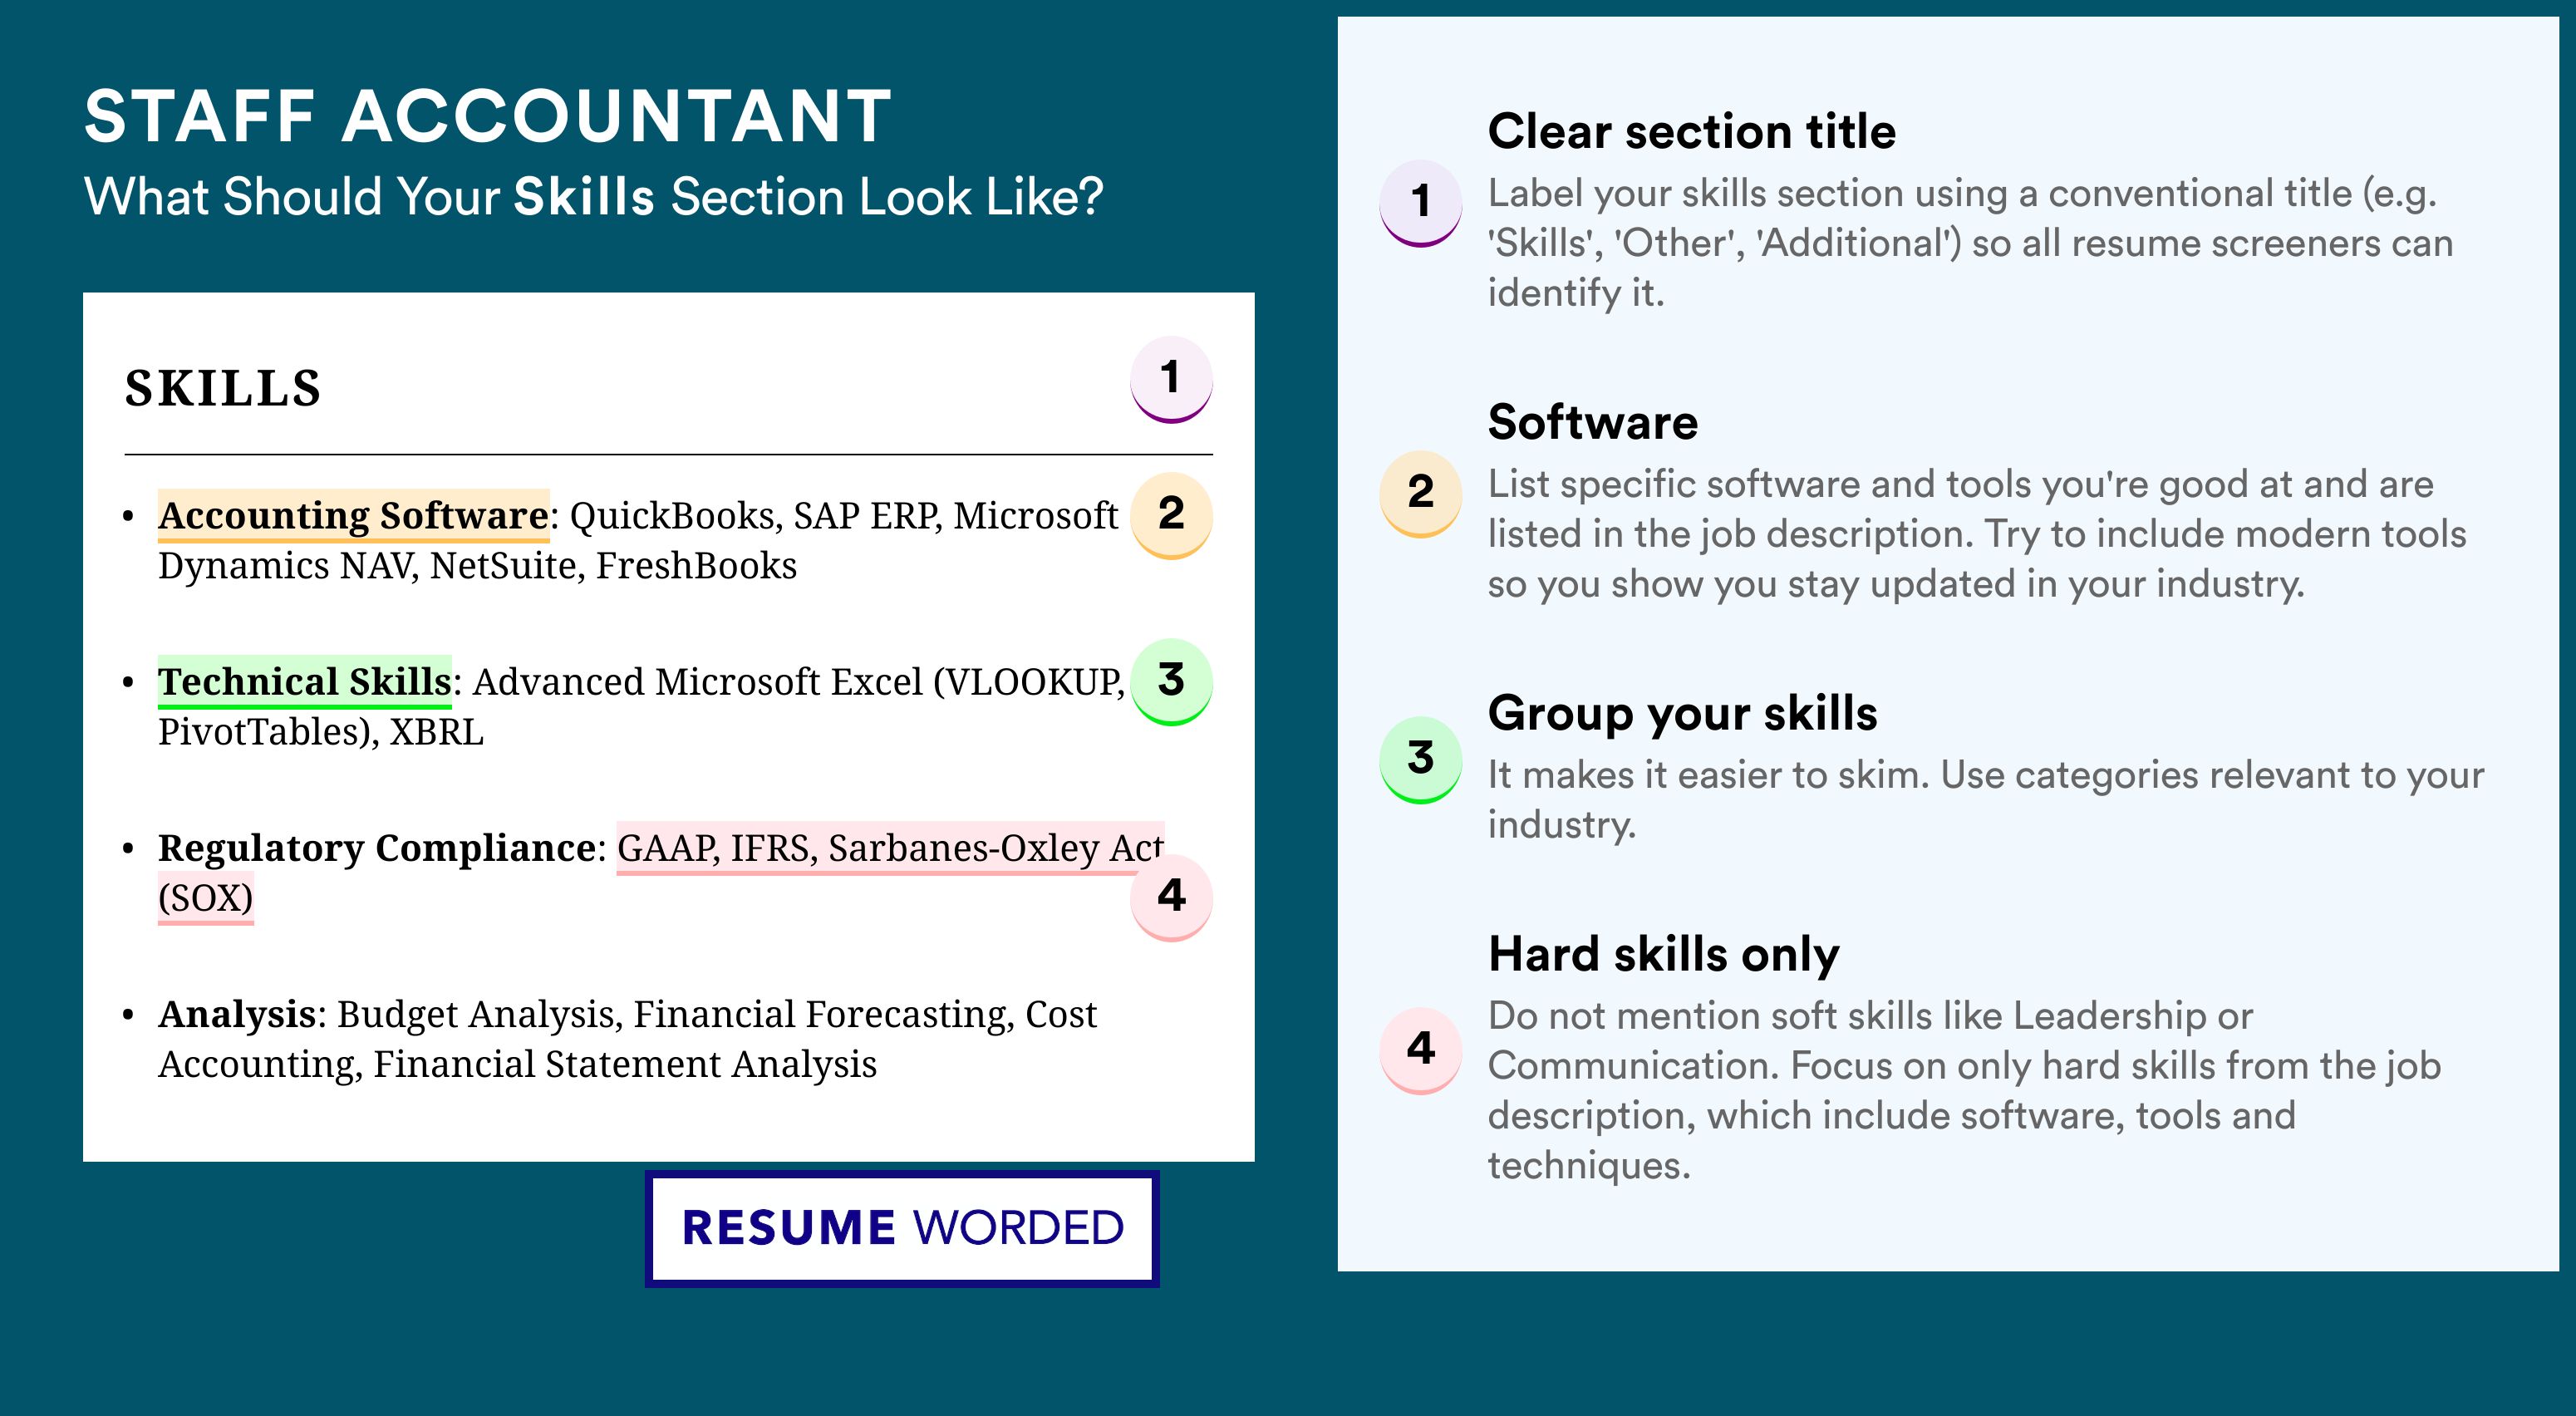 How To Write Your Skills Section - Staff Accountant Roles